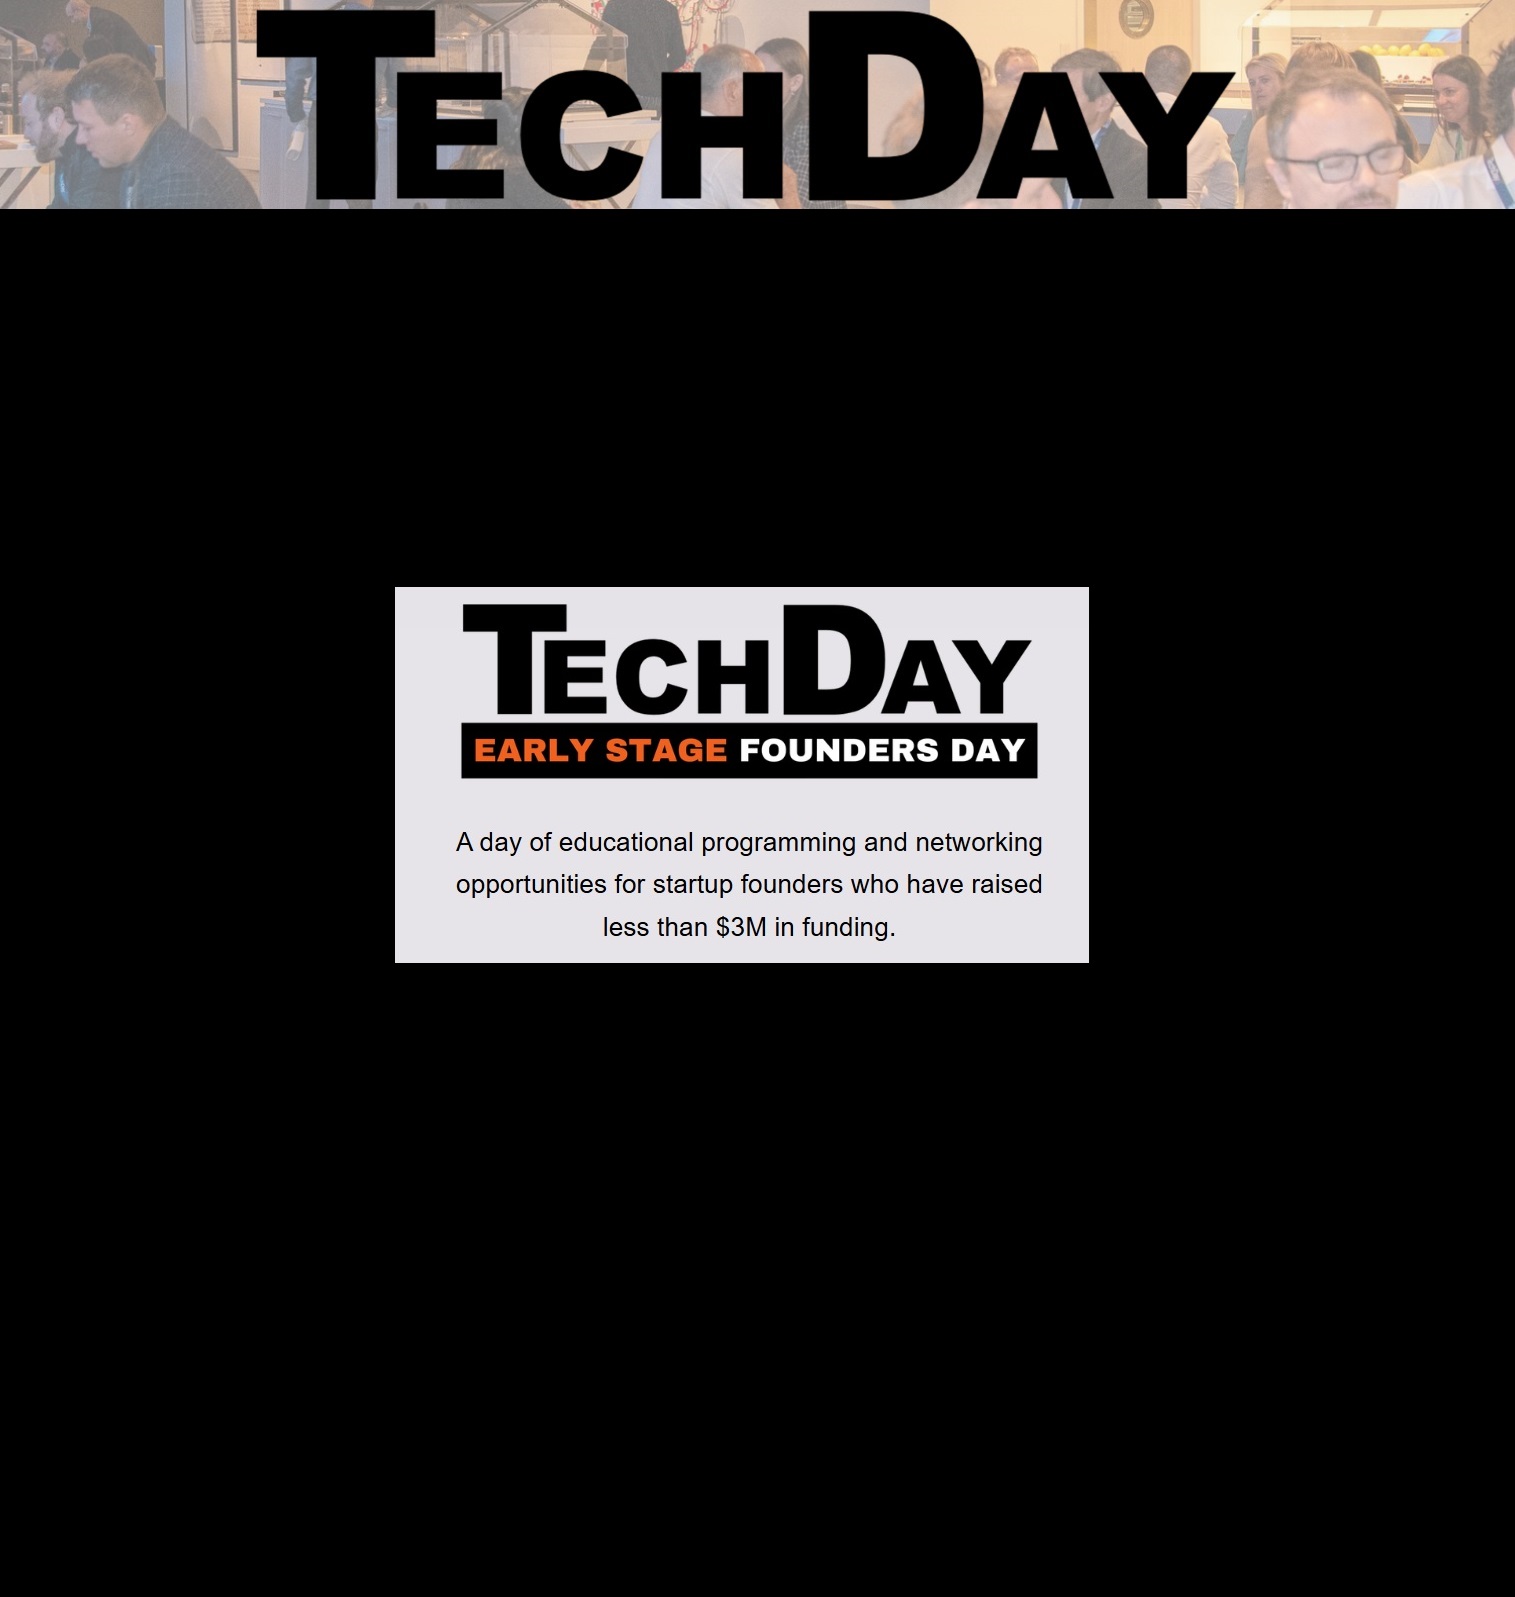 We’ll be at TechDay Early Stage Founders Day in NYC!